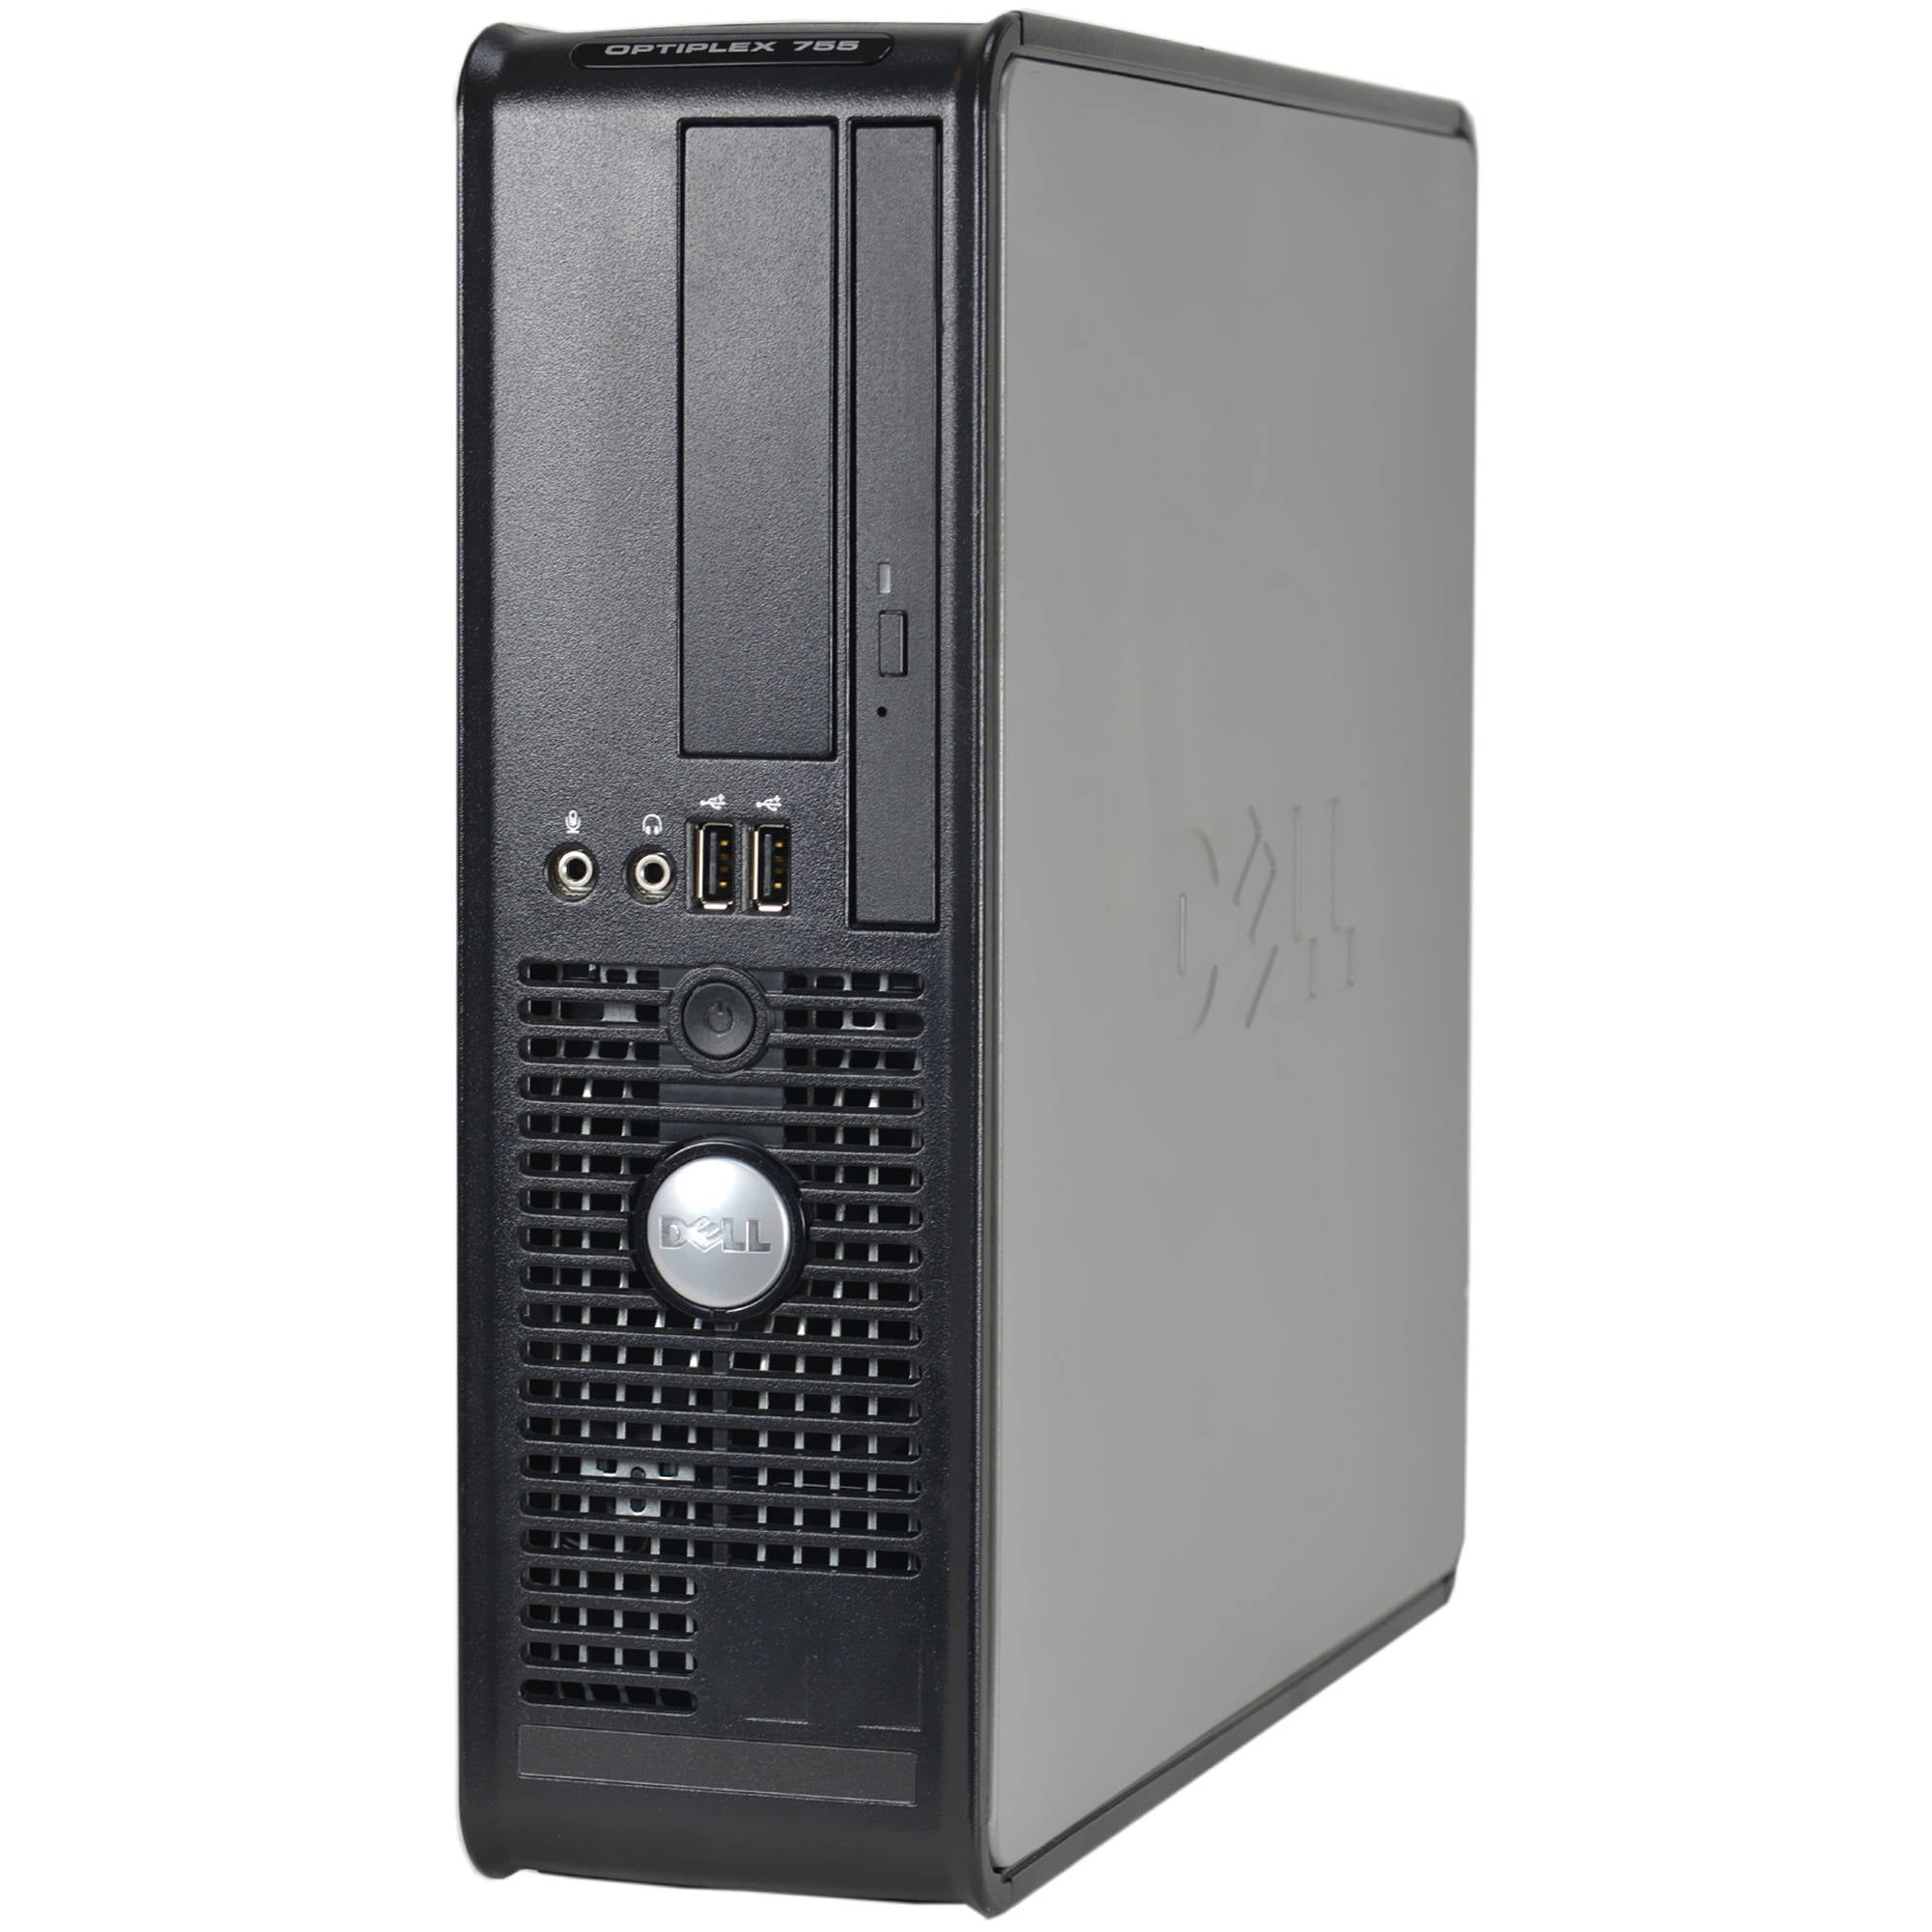 Refurbished Dell 755 Small Form Factor Desktop PC with Intel Core ...